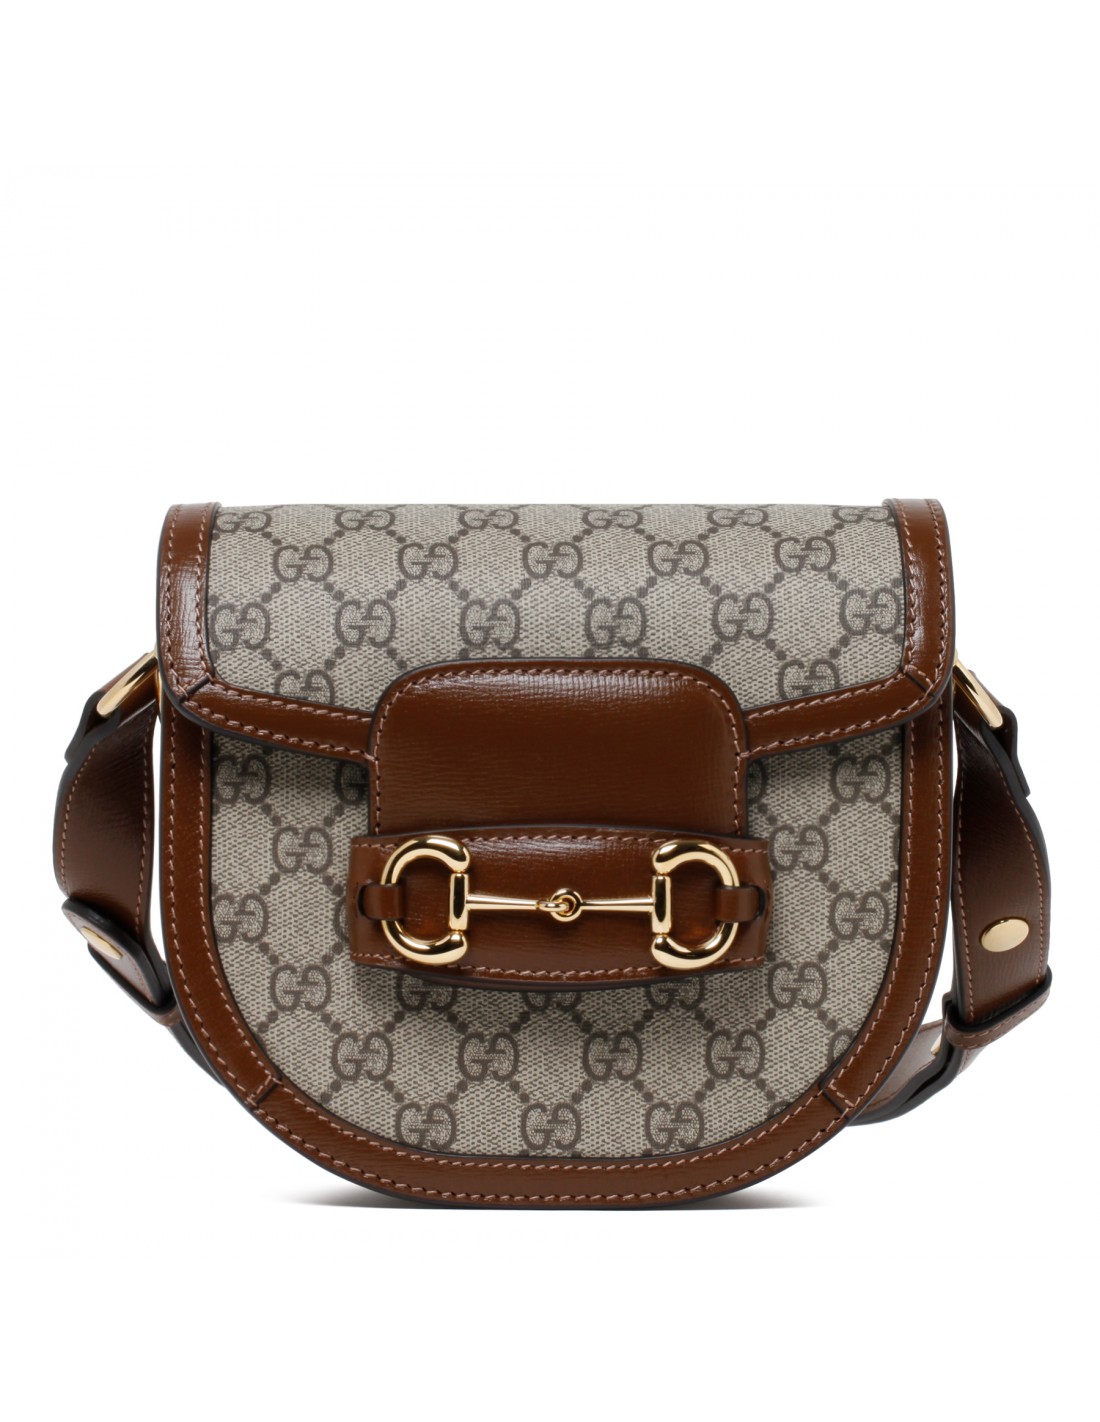 Gucci Horsebit 1955 mini rounded bag in brown leather